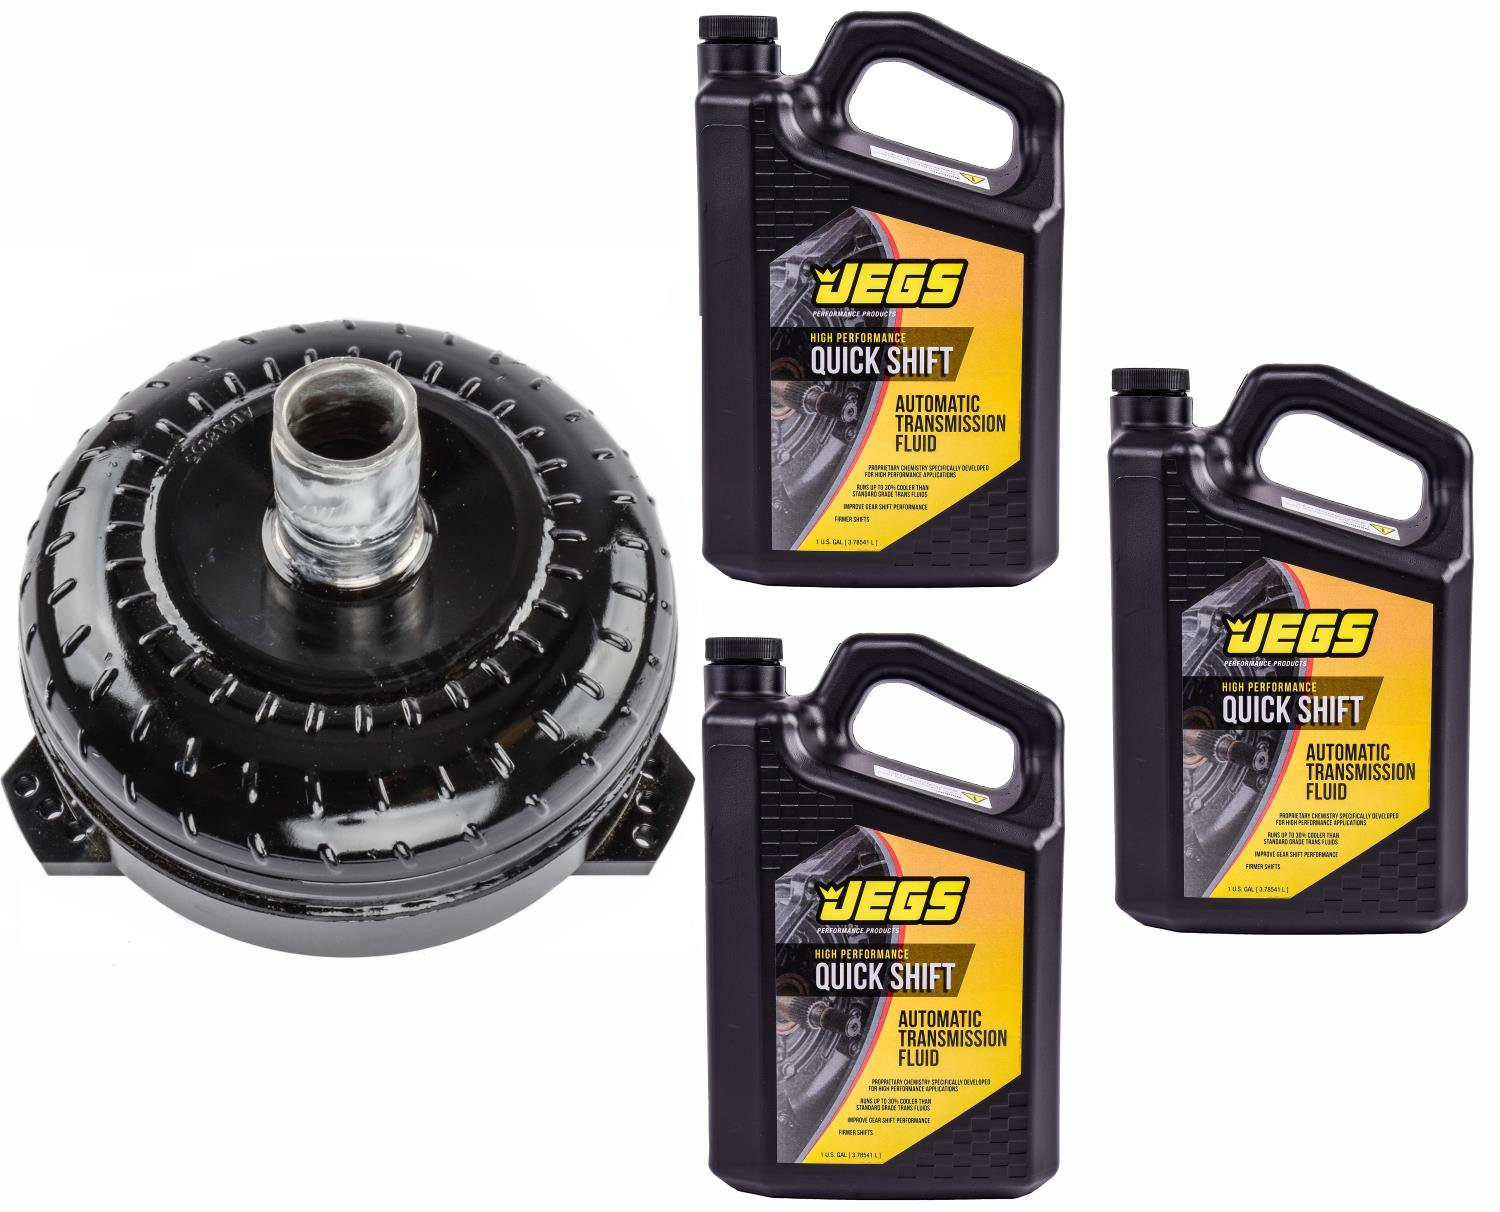 Torque Converter Kit for GM 4L80E/4L85E Mounted to